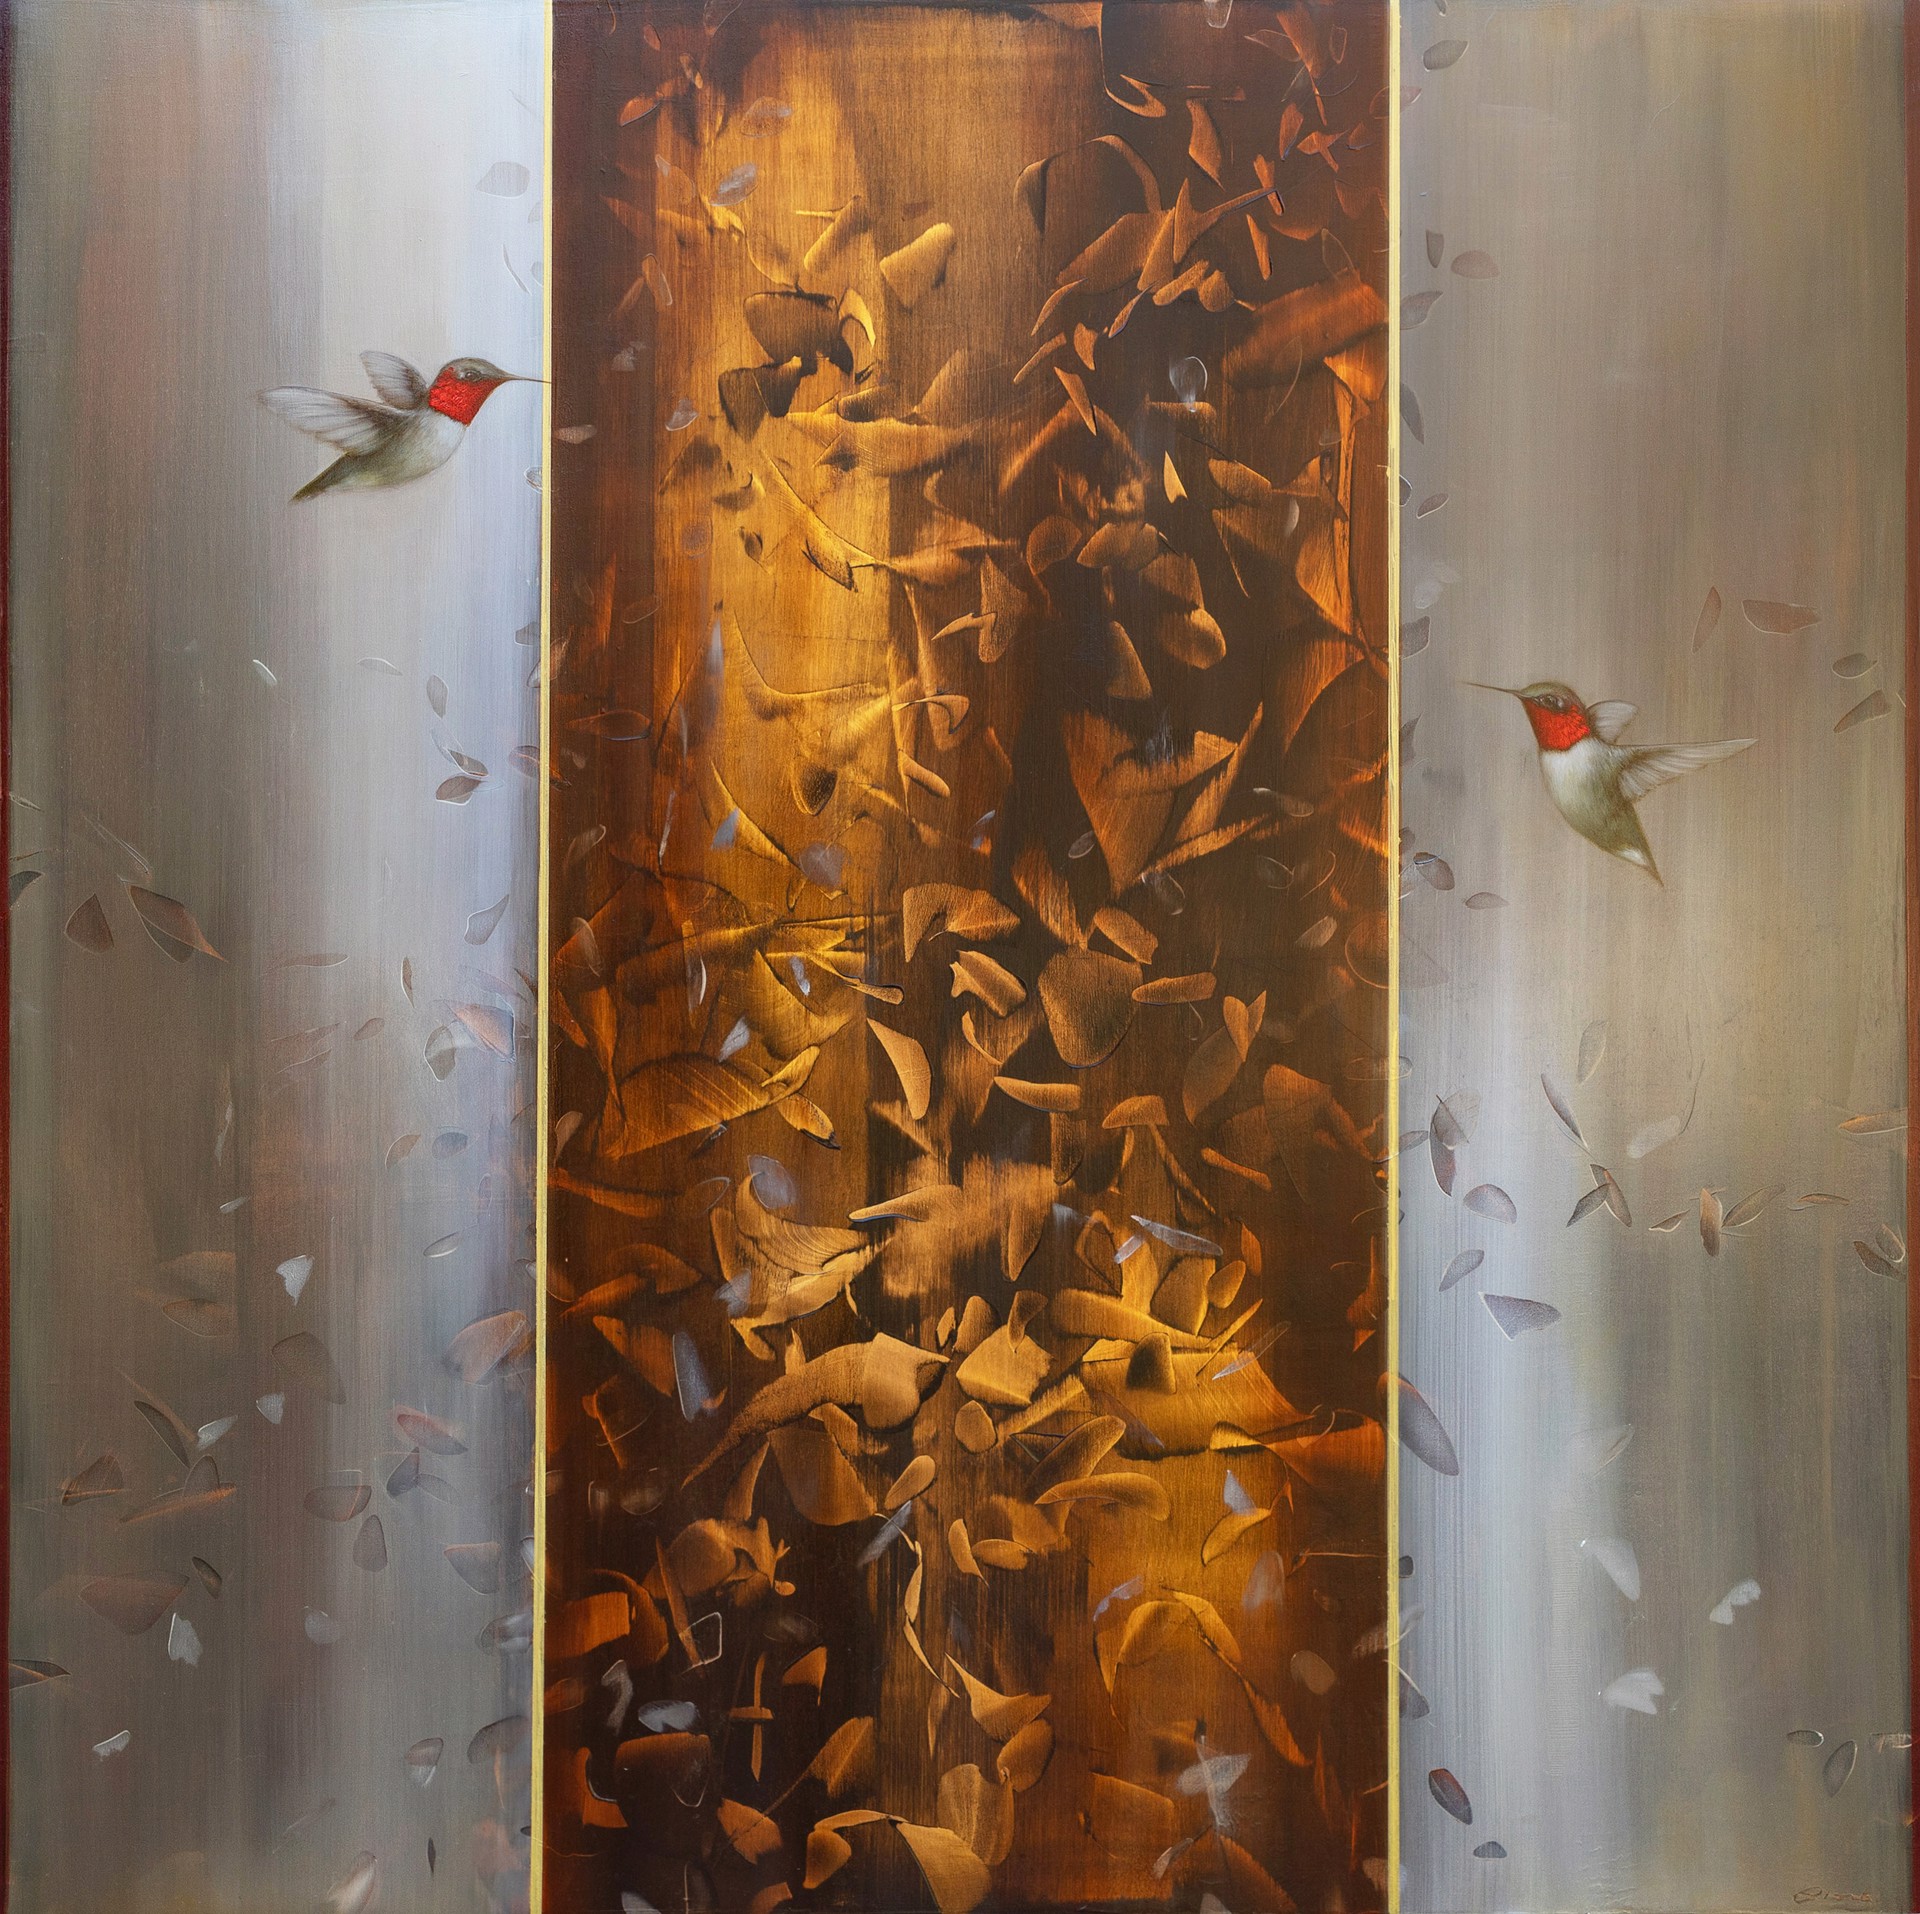 Waterfall of Gold by Jessica Pisano